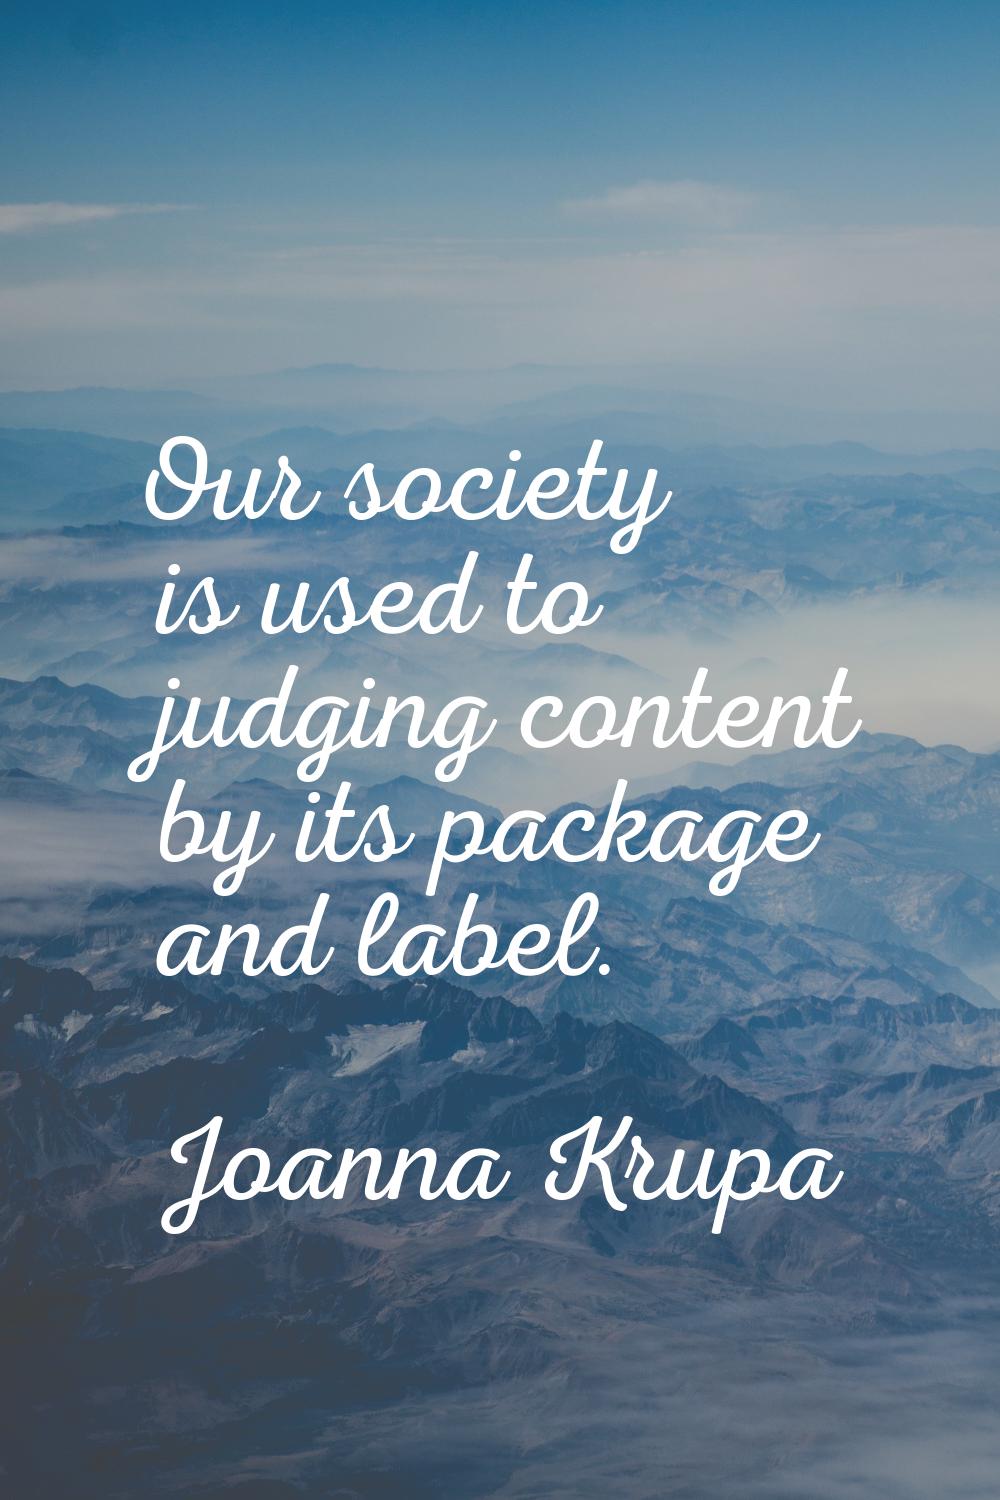 Our society is used to judging content by its package and label.